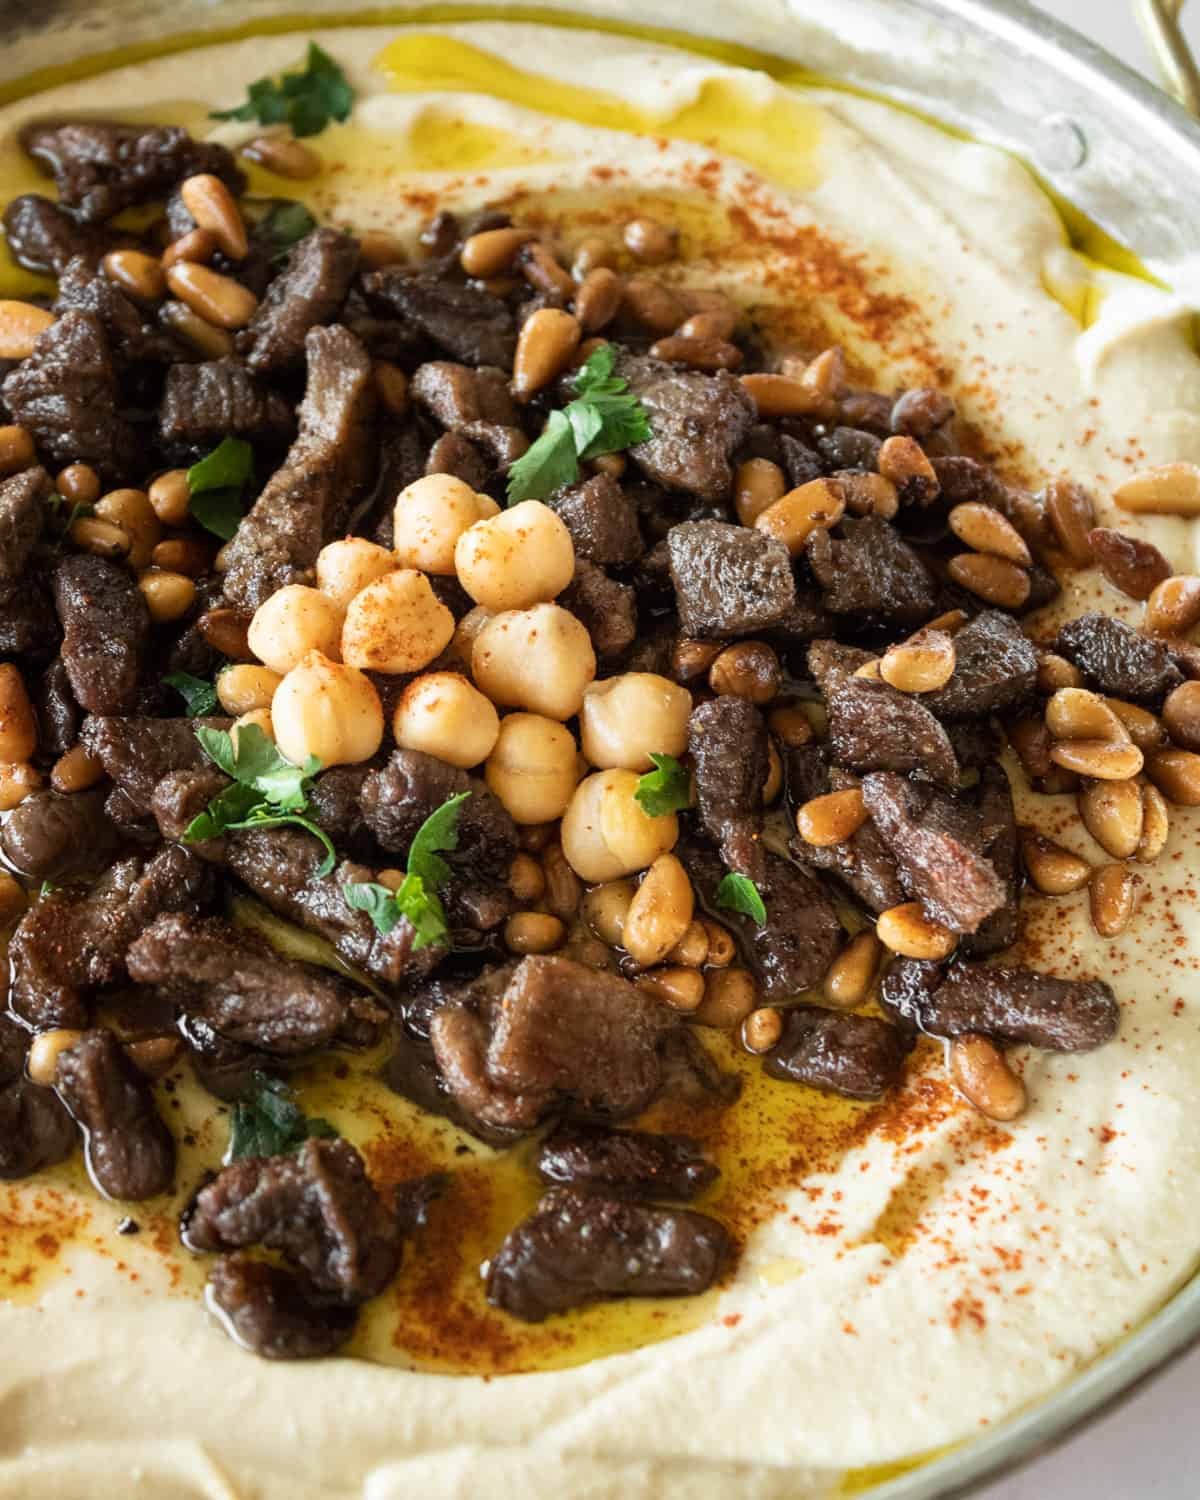 close up of spiced meat and pine nuts on top of hummus.